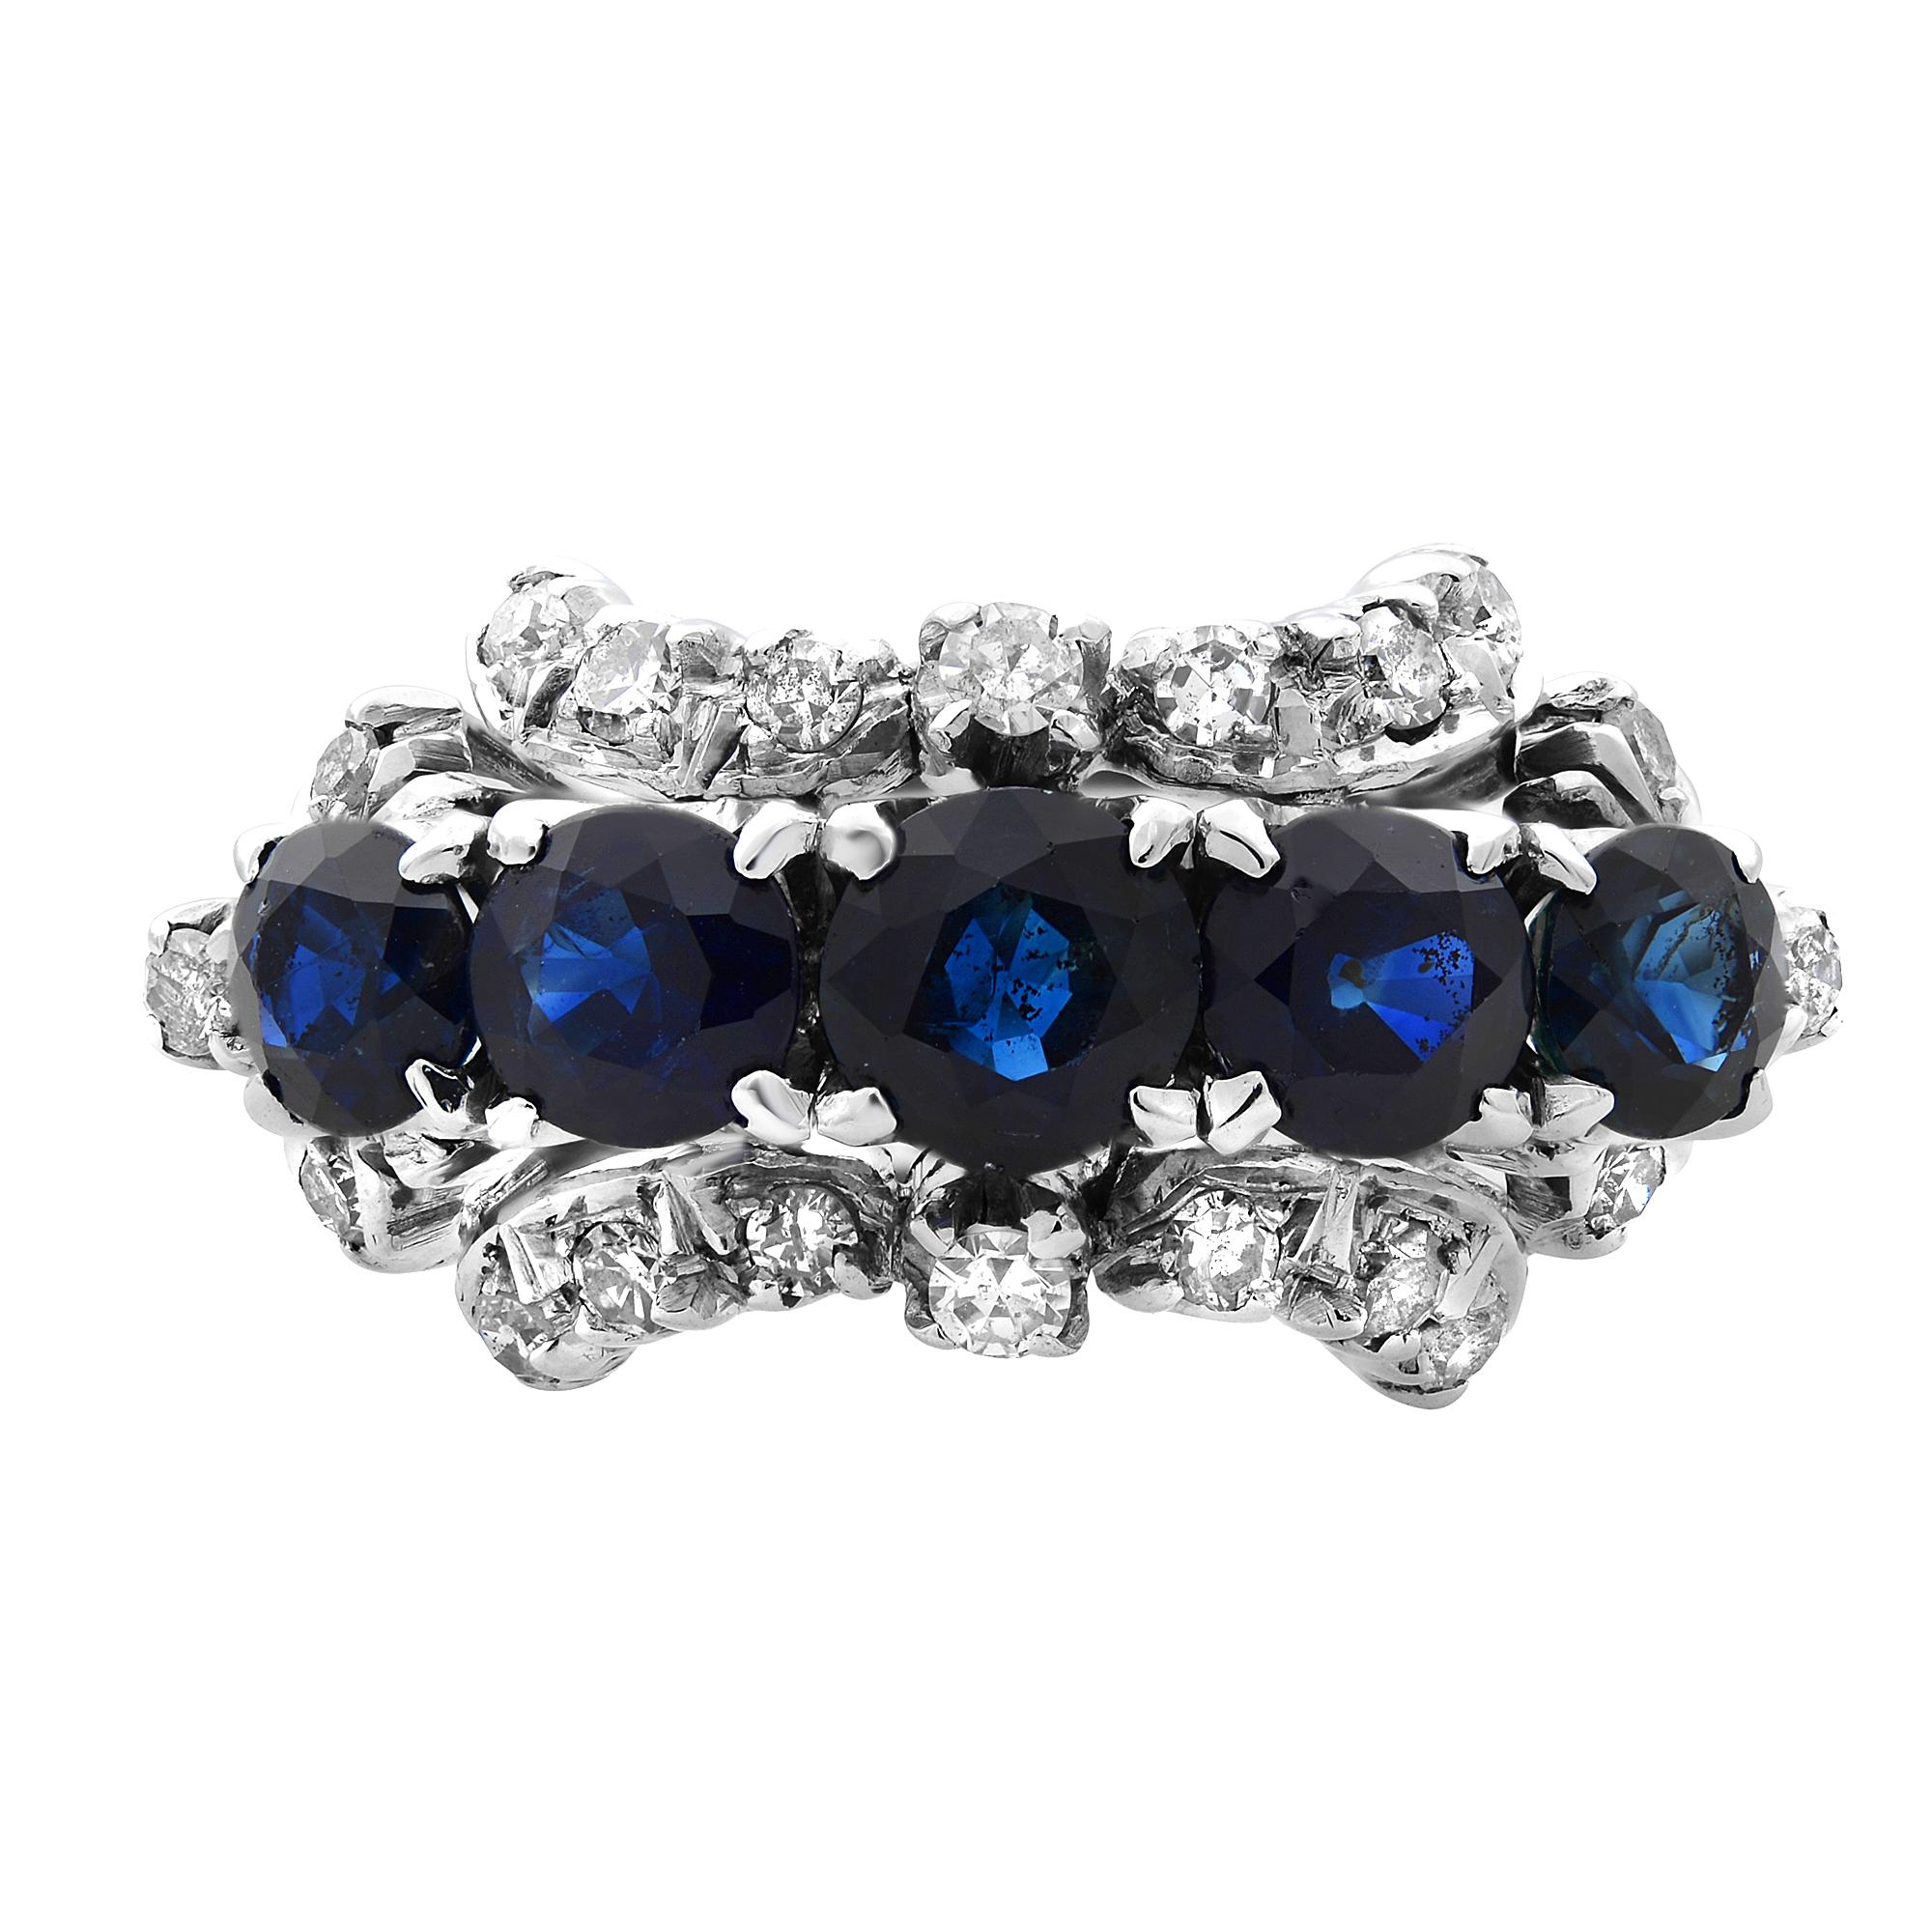  This beautiful ladies blue Sapphire and diamond cocktail Estate ring. Features 1.0cttw Sapphires and 0.35cttw Diamonds, all set with prongs on 18K white gold band. Ring size 9.25(can be sized). Comes with a presentable gift box.
